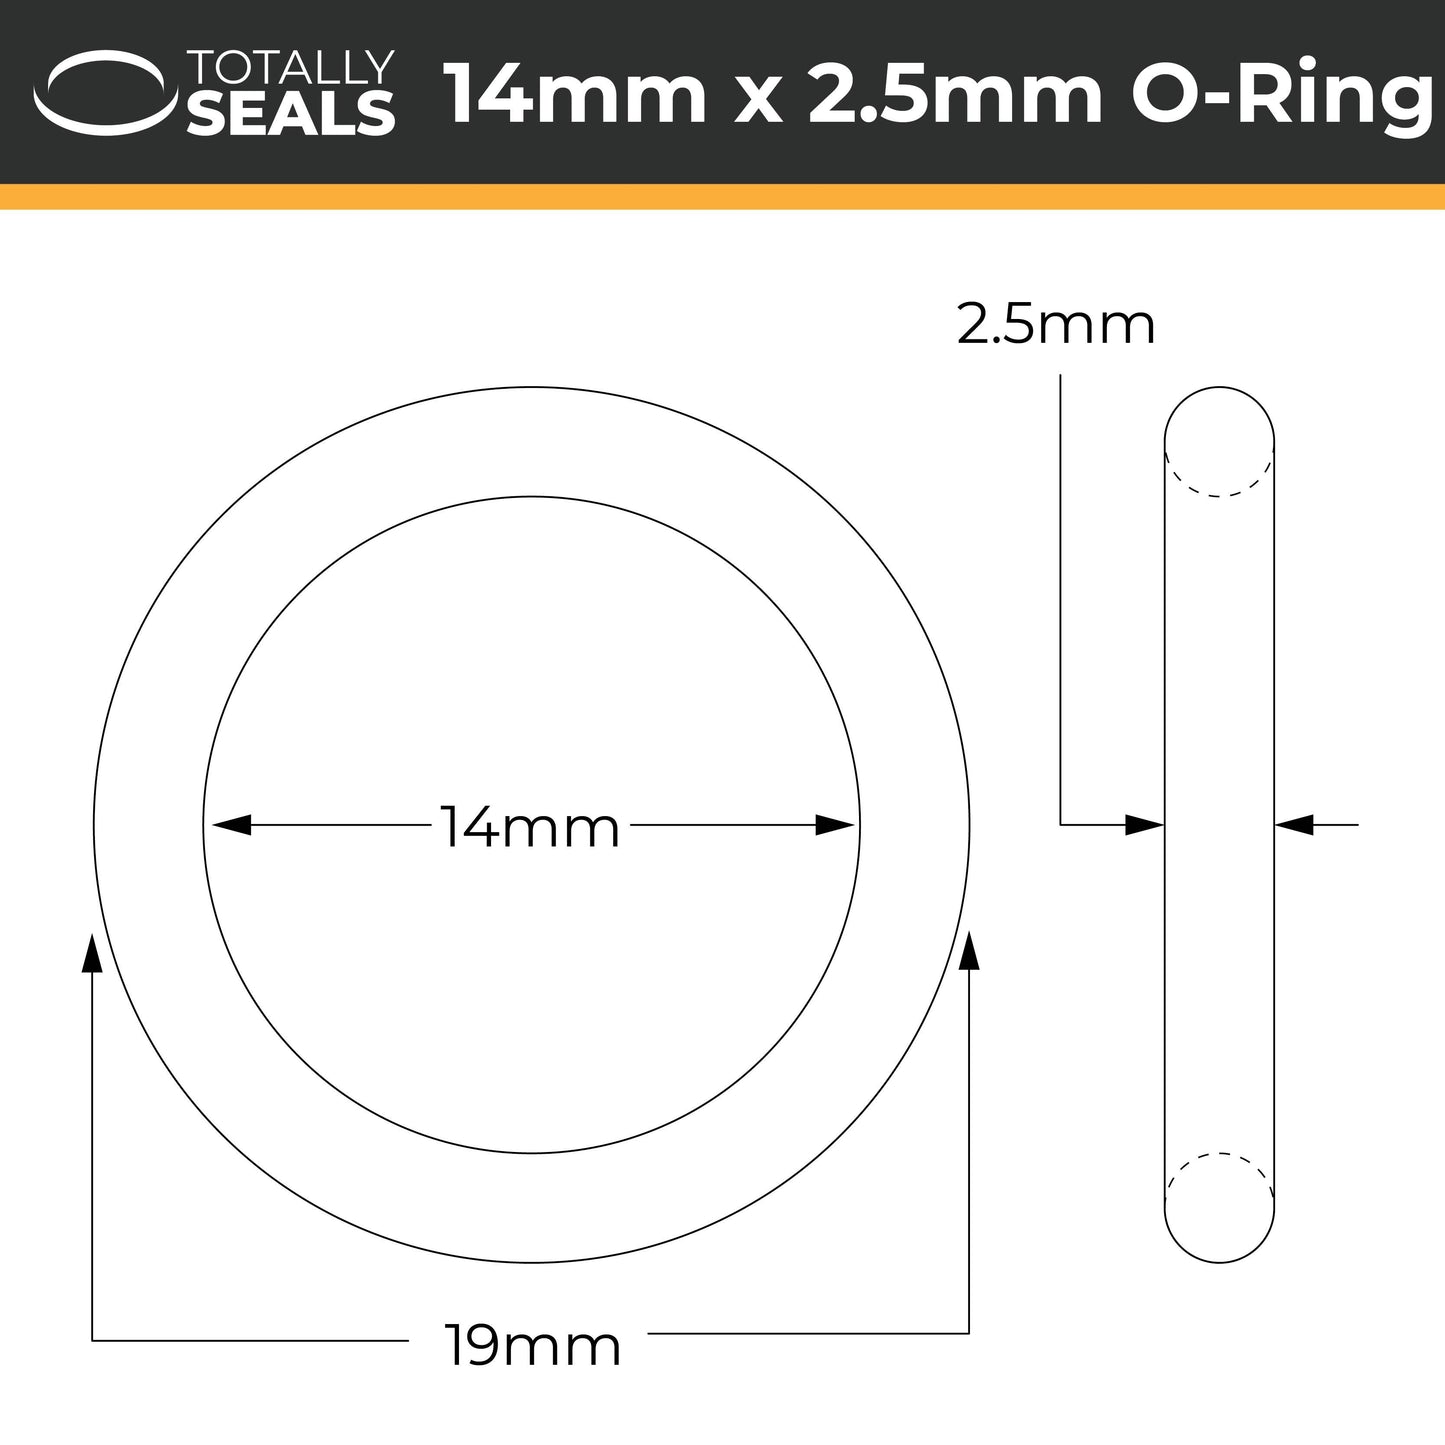 14mm x 2.5mm (19mm OD) Nitrile O-Rings - Totally Seals®